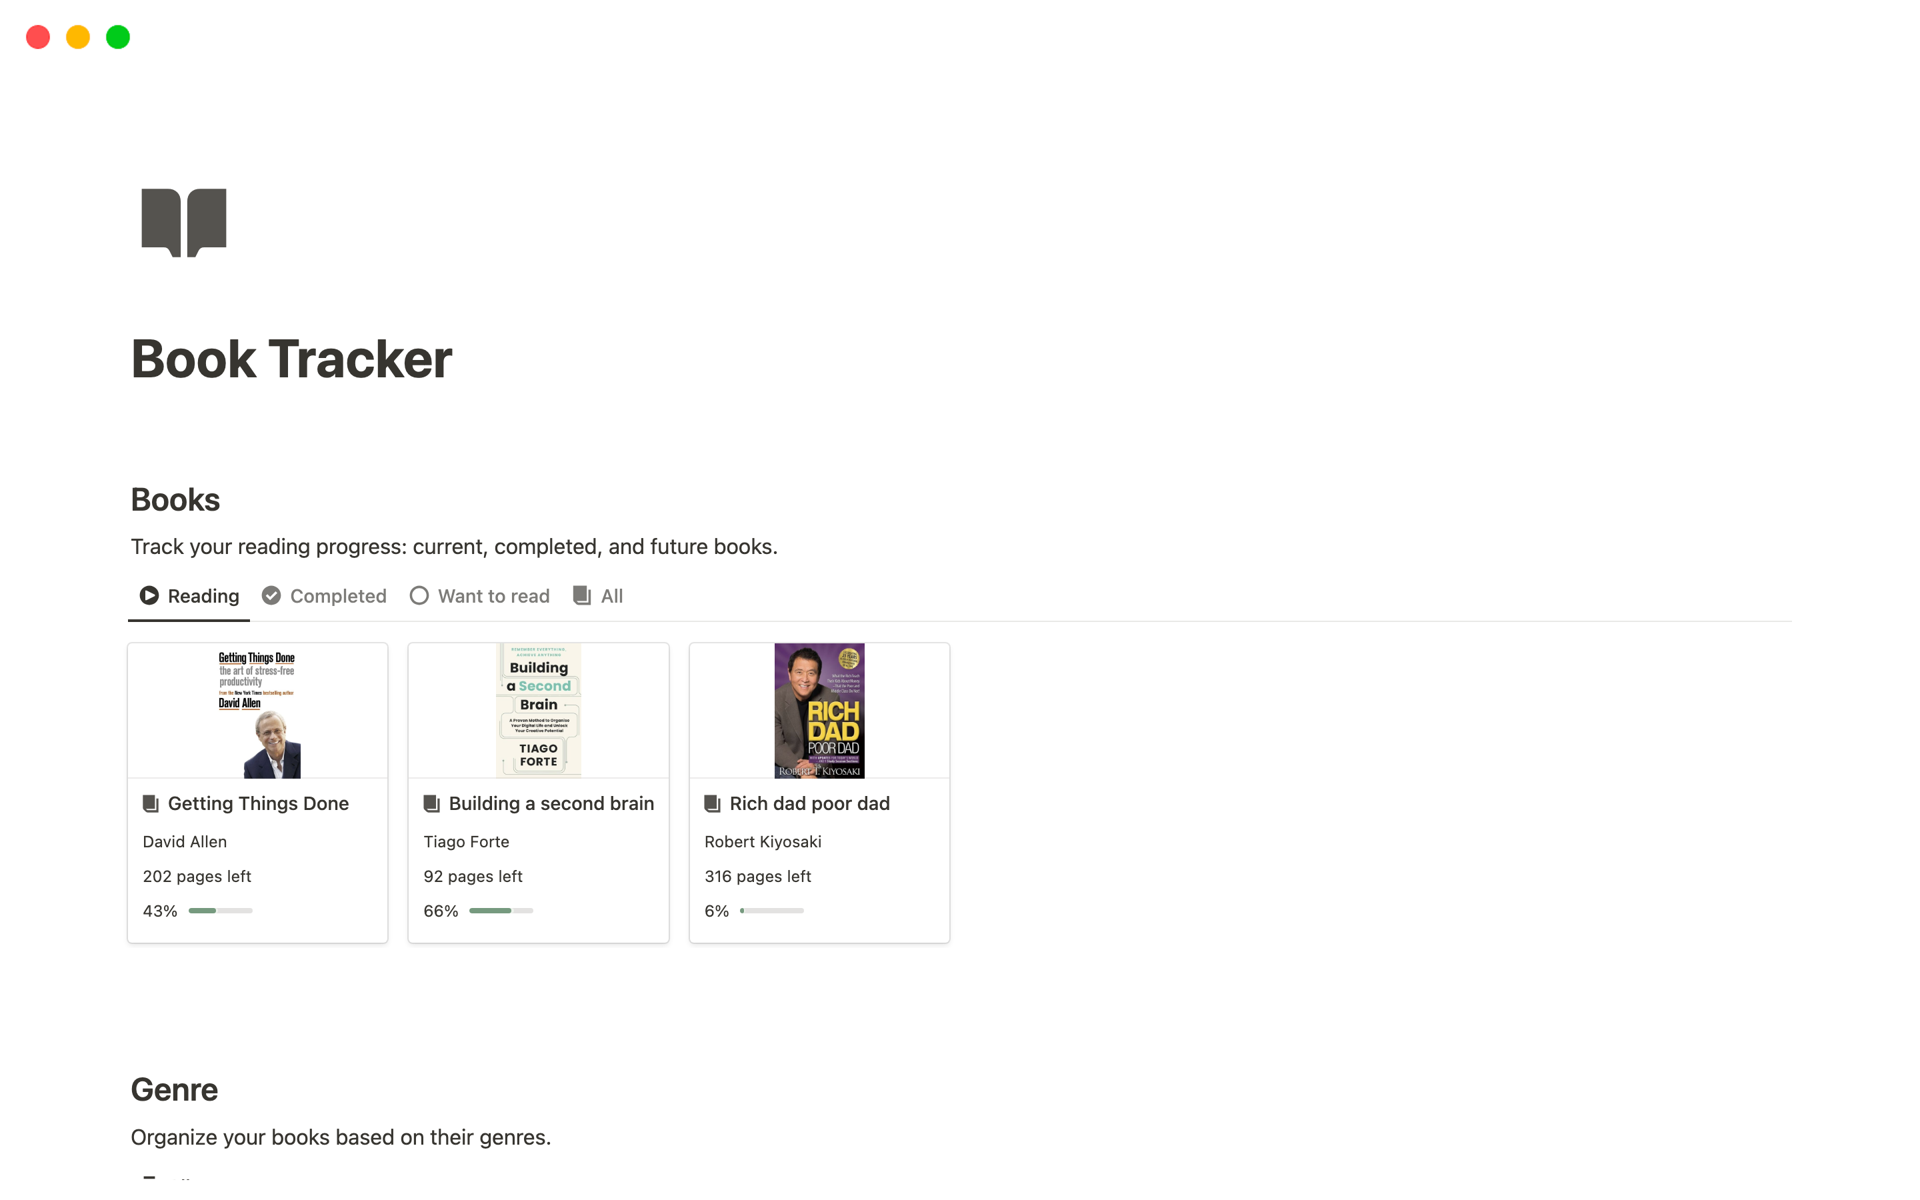 Keep your reading journey organized and inspiring with our book tracker, capable of logging progress, noting inspiring quotes, and sorting reads by genre.